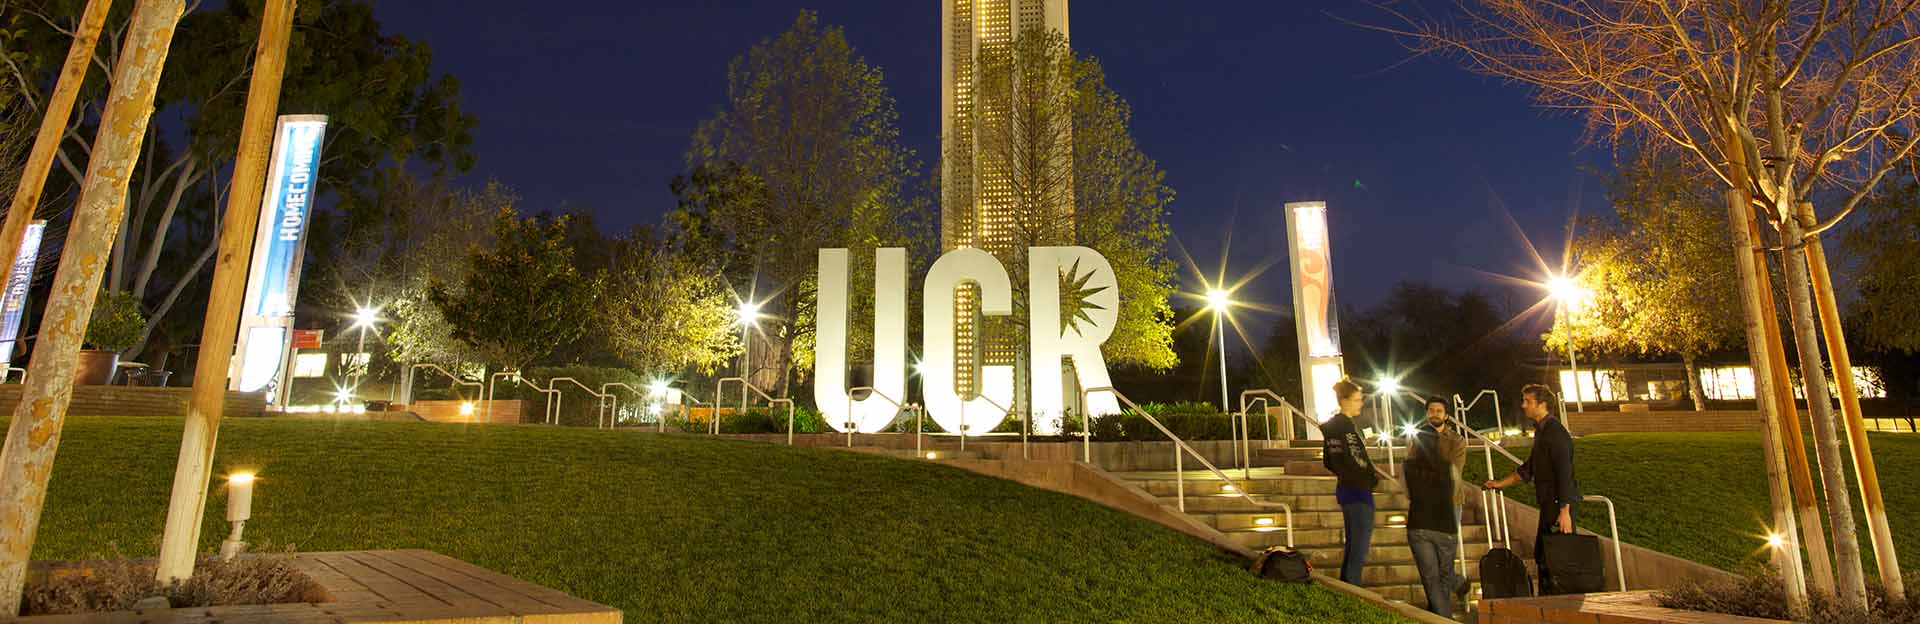 UCR sign and bell tower at night